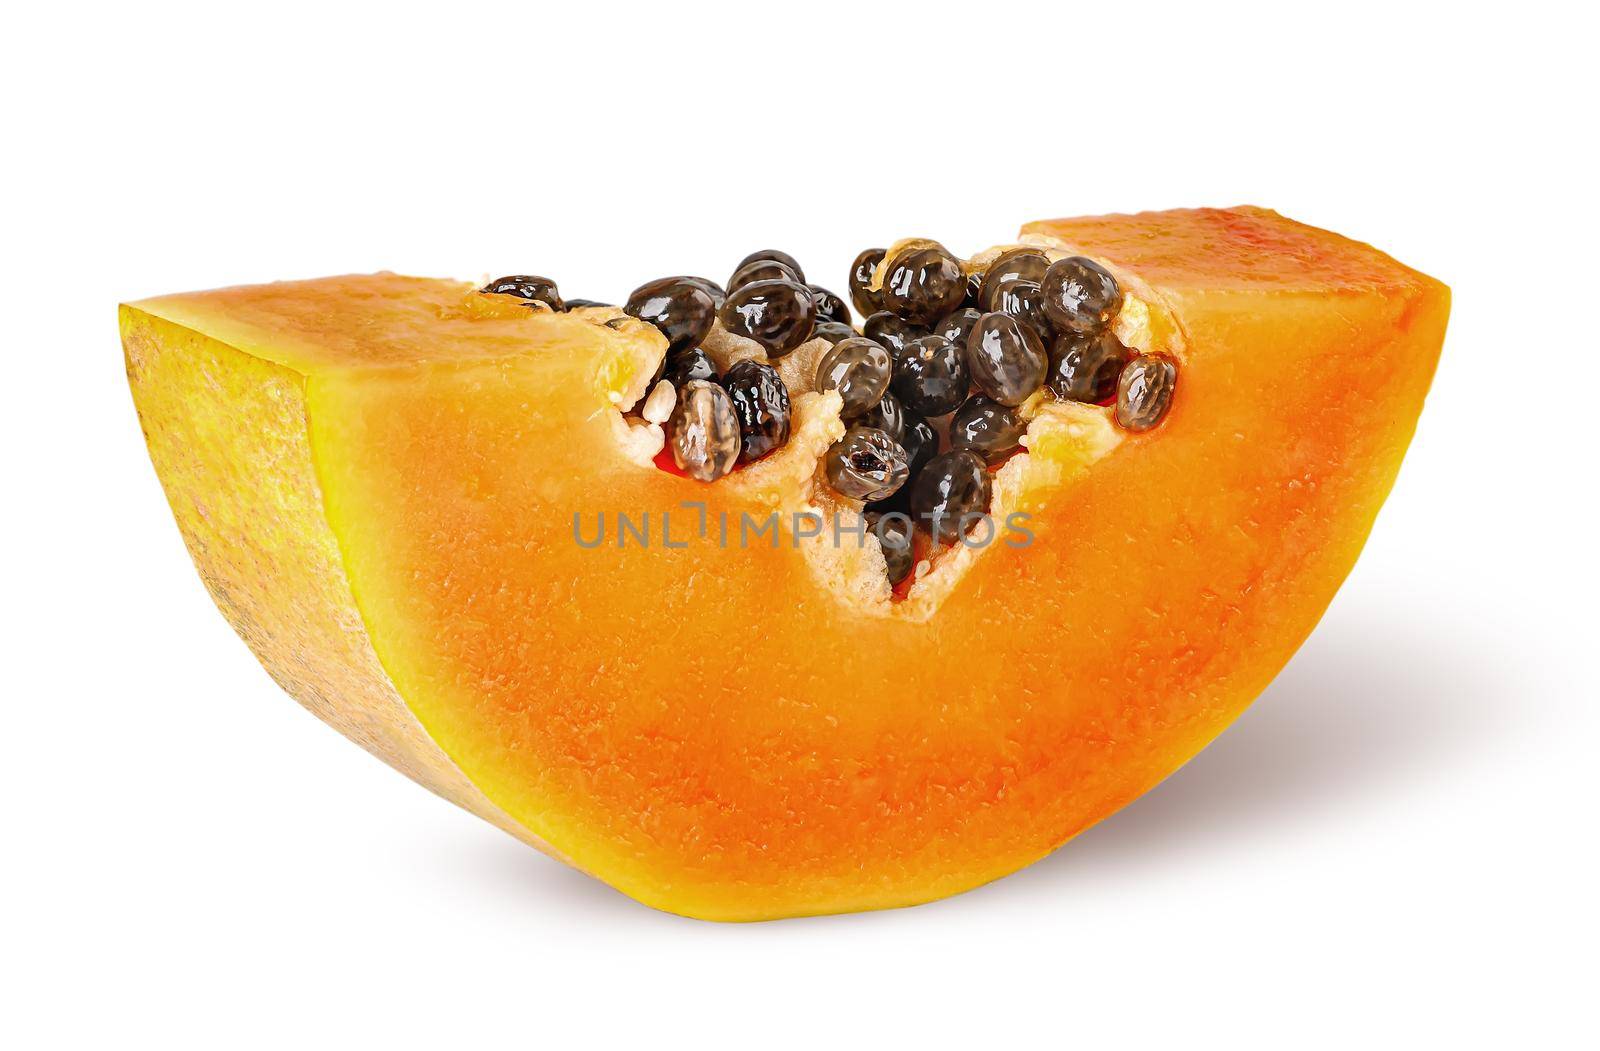 Small piece of ripe papaya rotated isolated on white by Cipariss